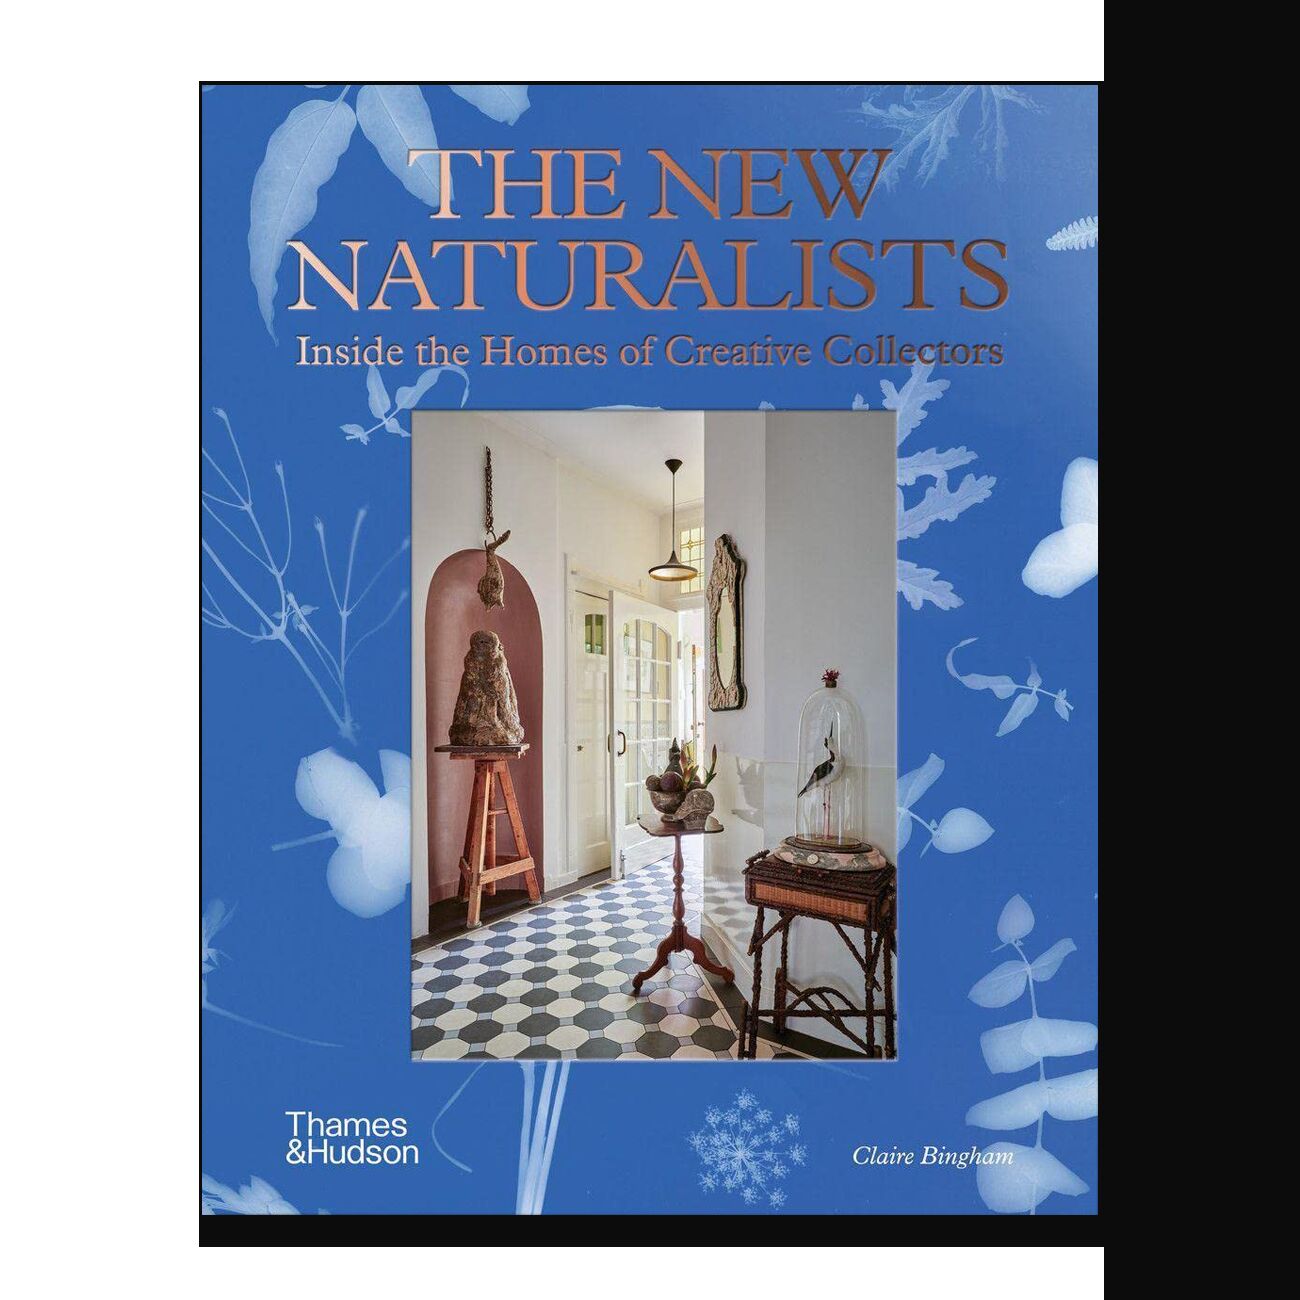 The New Naturalists. Inside the Homes of Creative Collectors